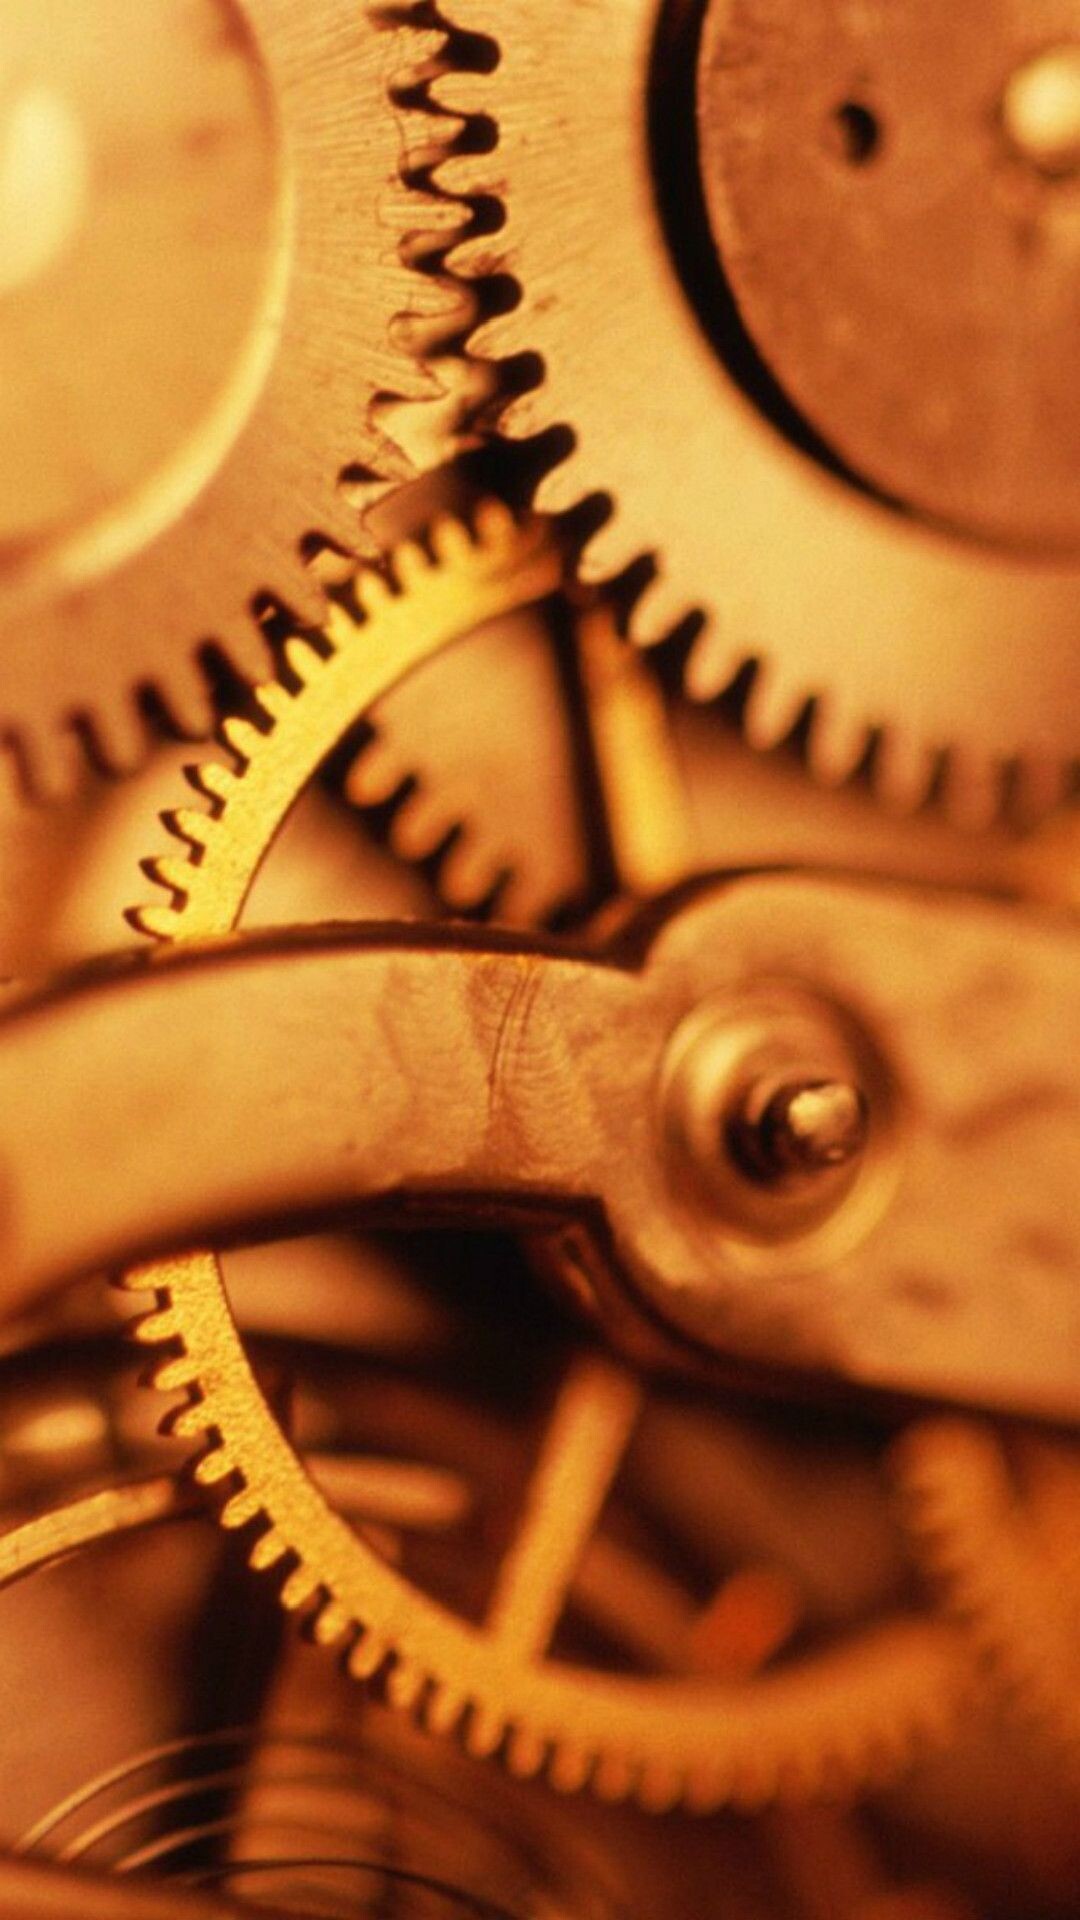 Gear: Scientific mechanical system, Mechanics aesthetic, A mechanism for transmitting motion. 1080x1920 Full HD Background.